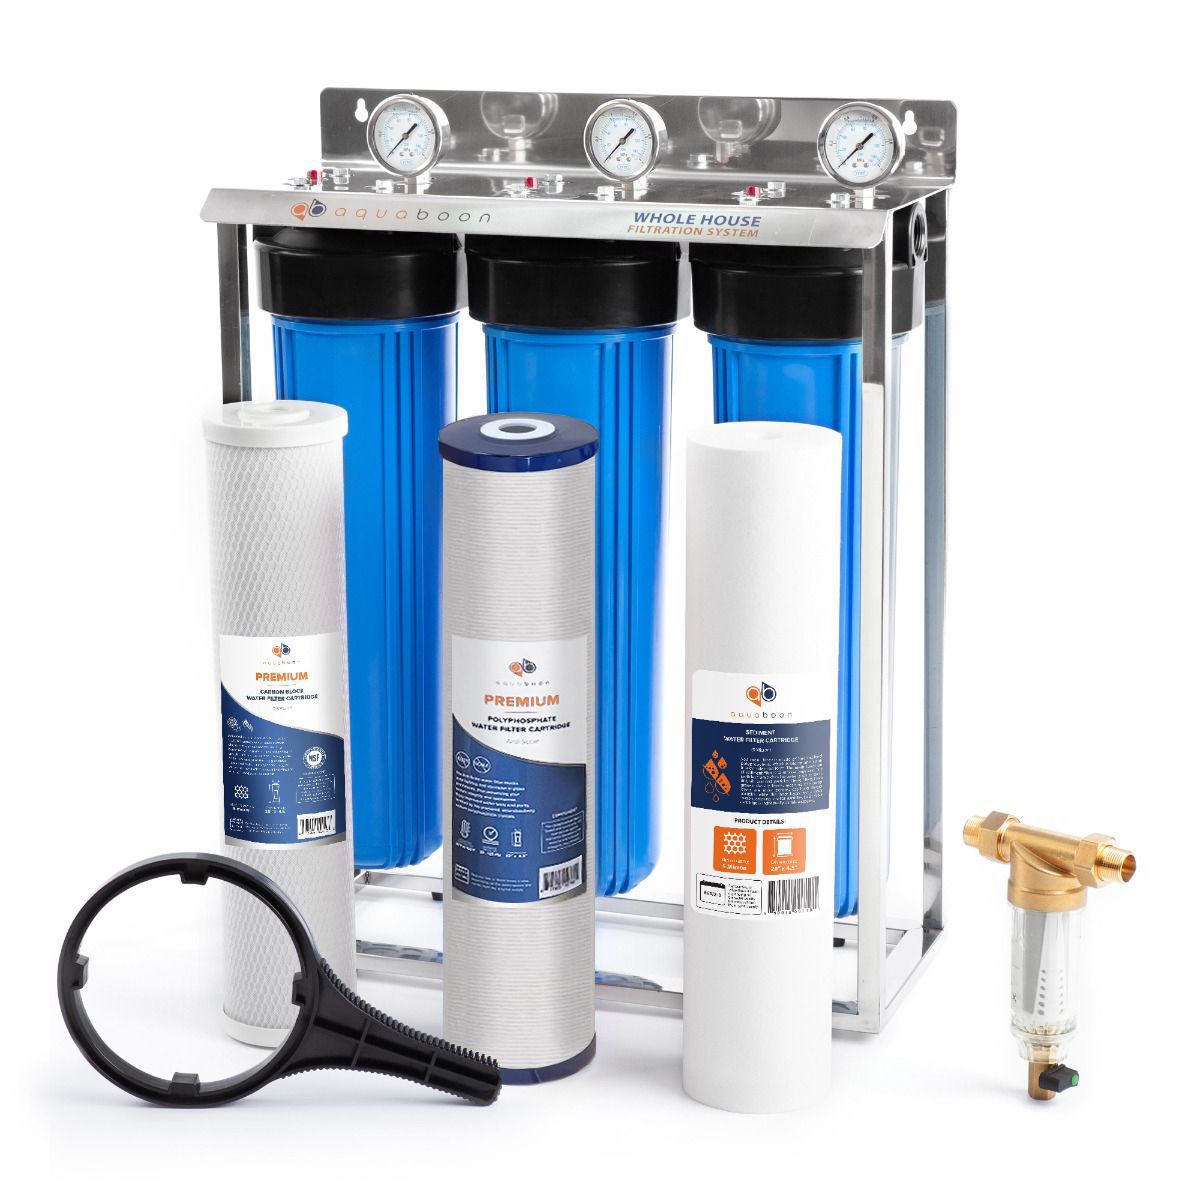 Aquaboon Whole House 3-Stage 20" Water Filtration System For Anti-scale Filtration (Carbon, Polyphosphate, Sediment Filters) on Stainless Steel Stand AB-3WHS20BB-1C20BB5MP-1PPH20BB-1S20BB5M